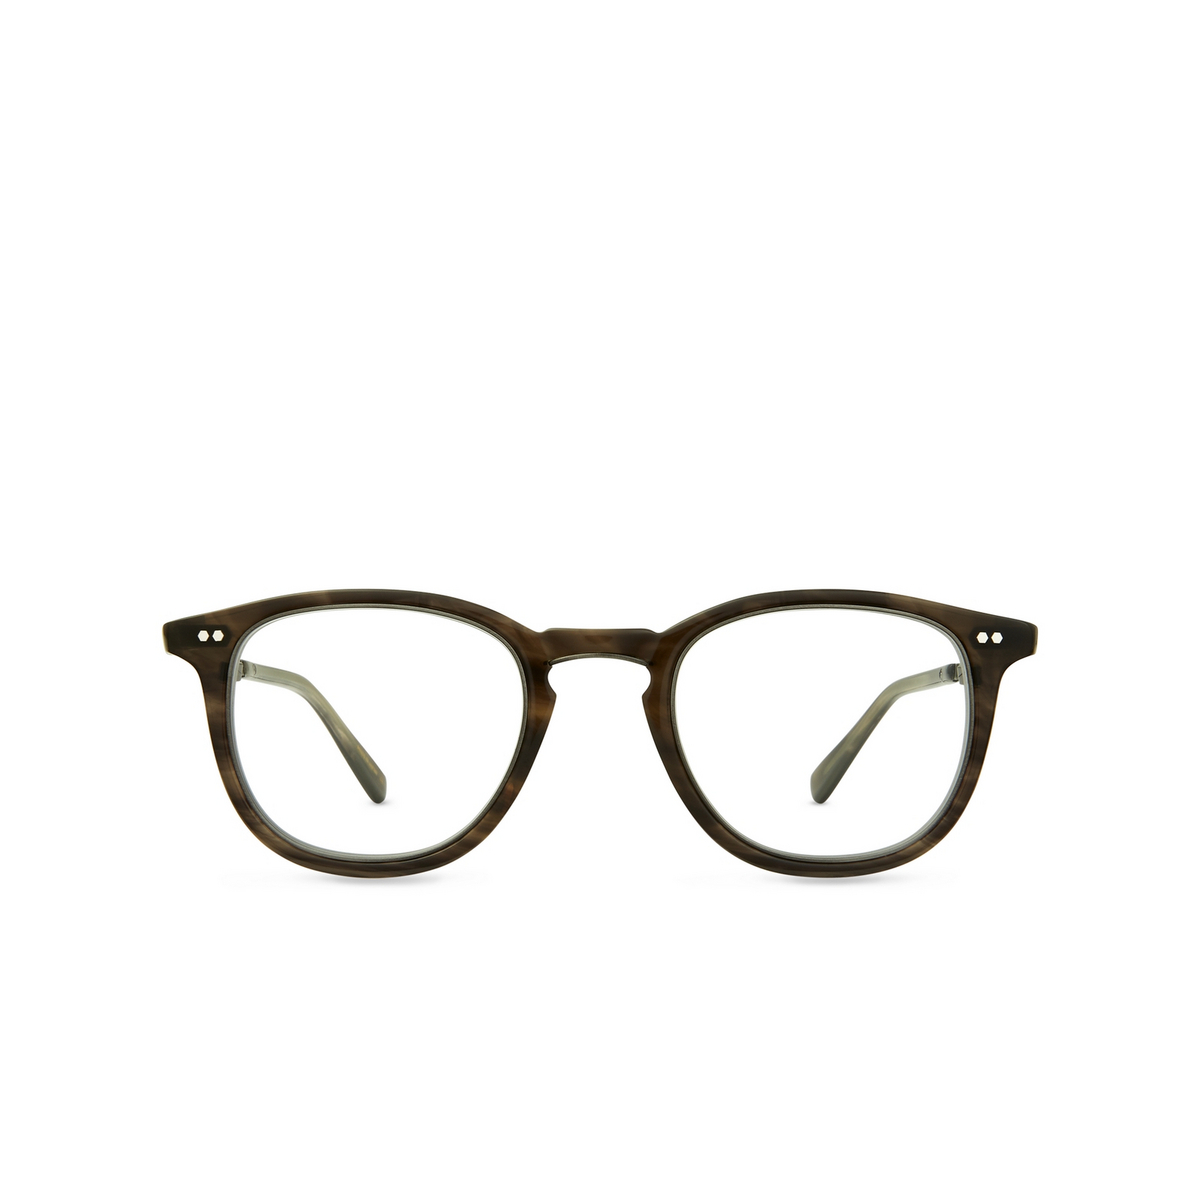 Mr. Leight COOPERS C Eyeglasses OLA-PW Olive Laminate-Pewter - front view